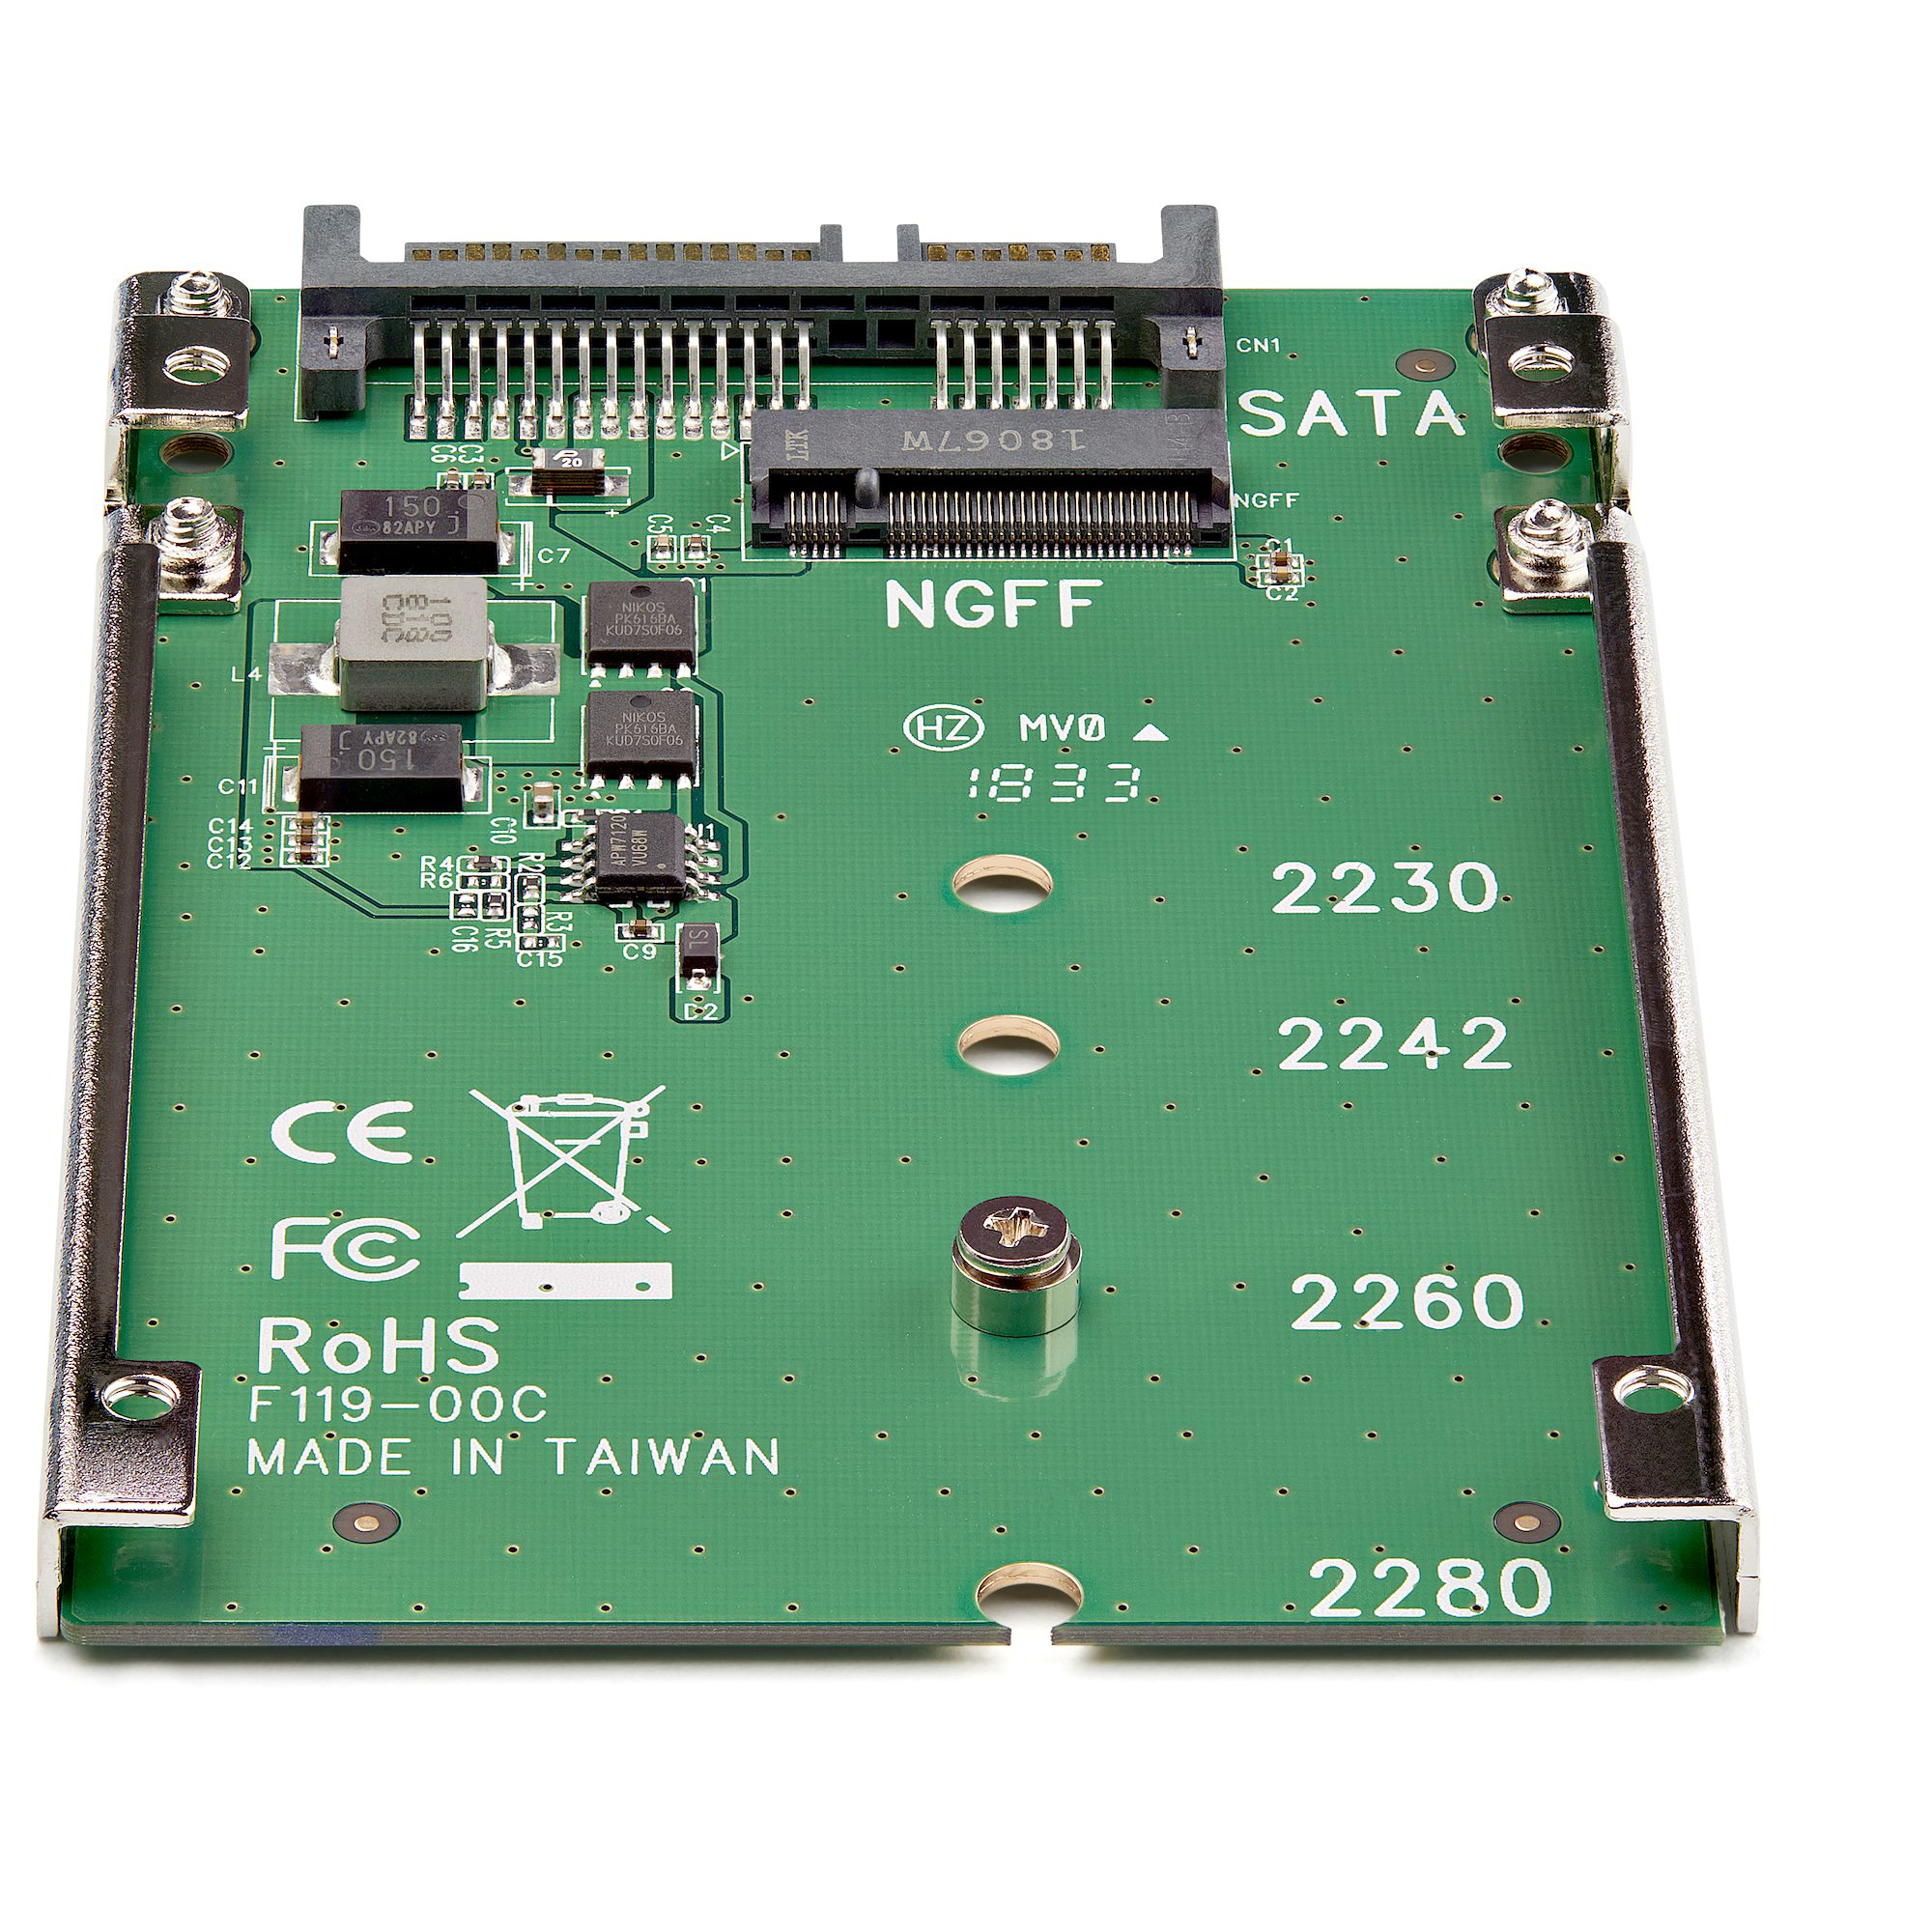 StarTech.com M.2 NGFF SSD to 2.5in SATA Adapter Converter